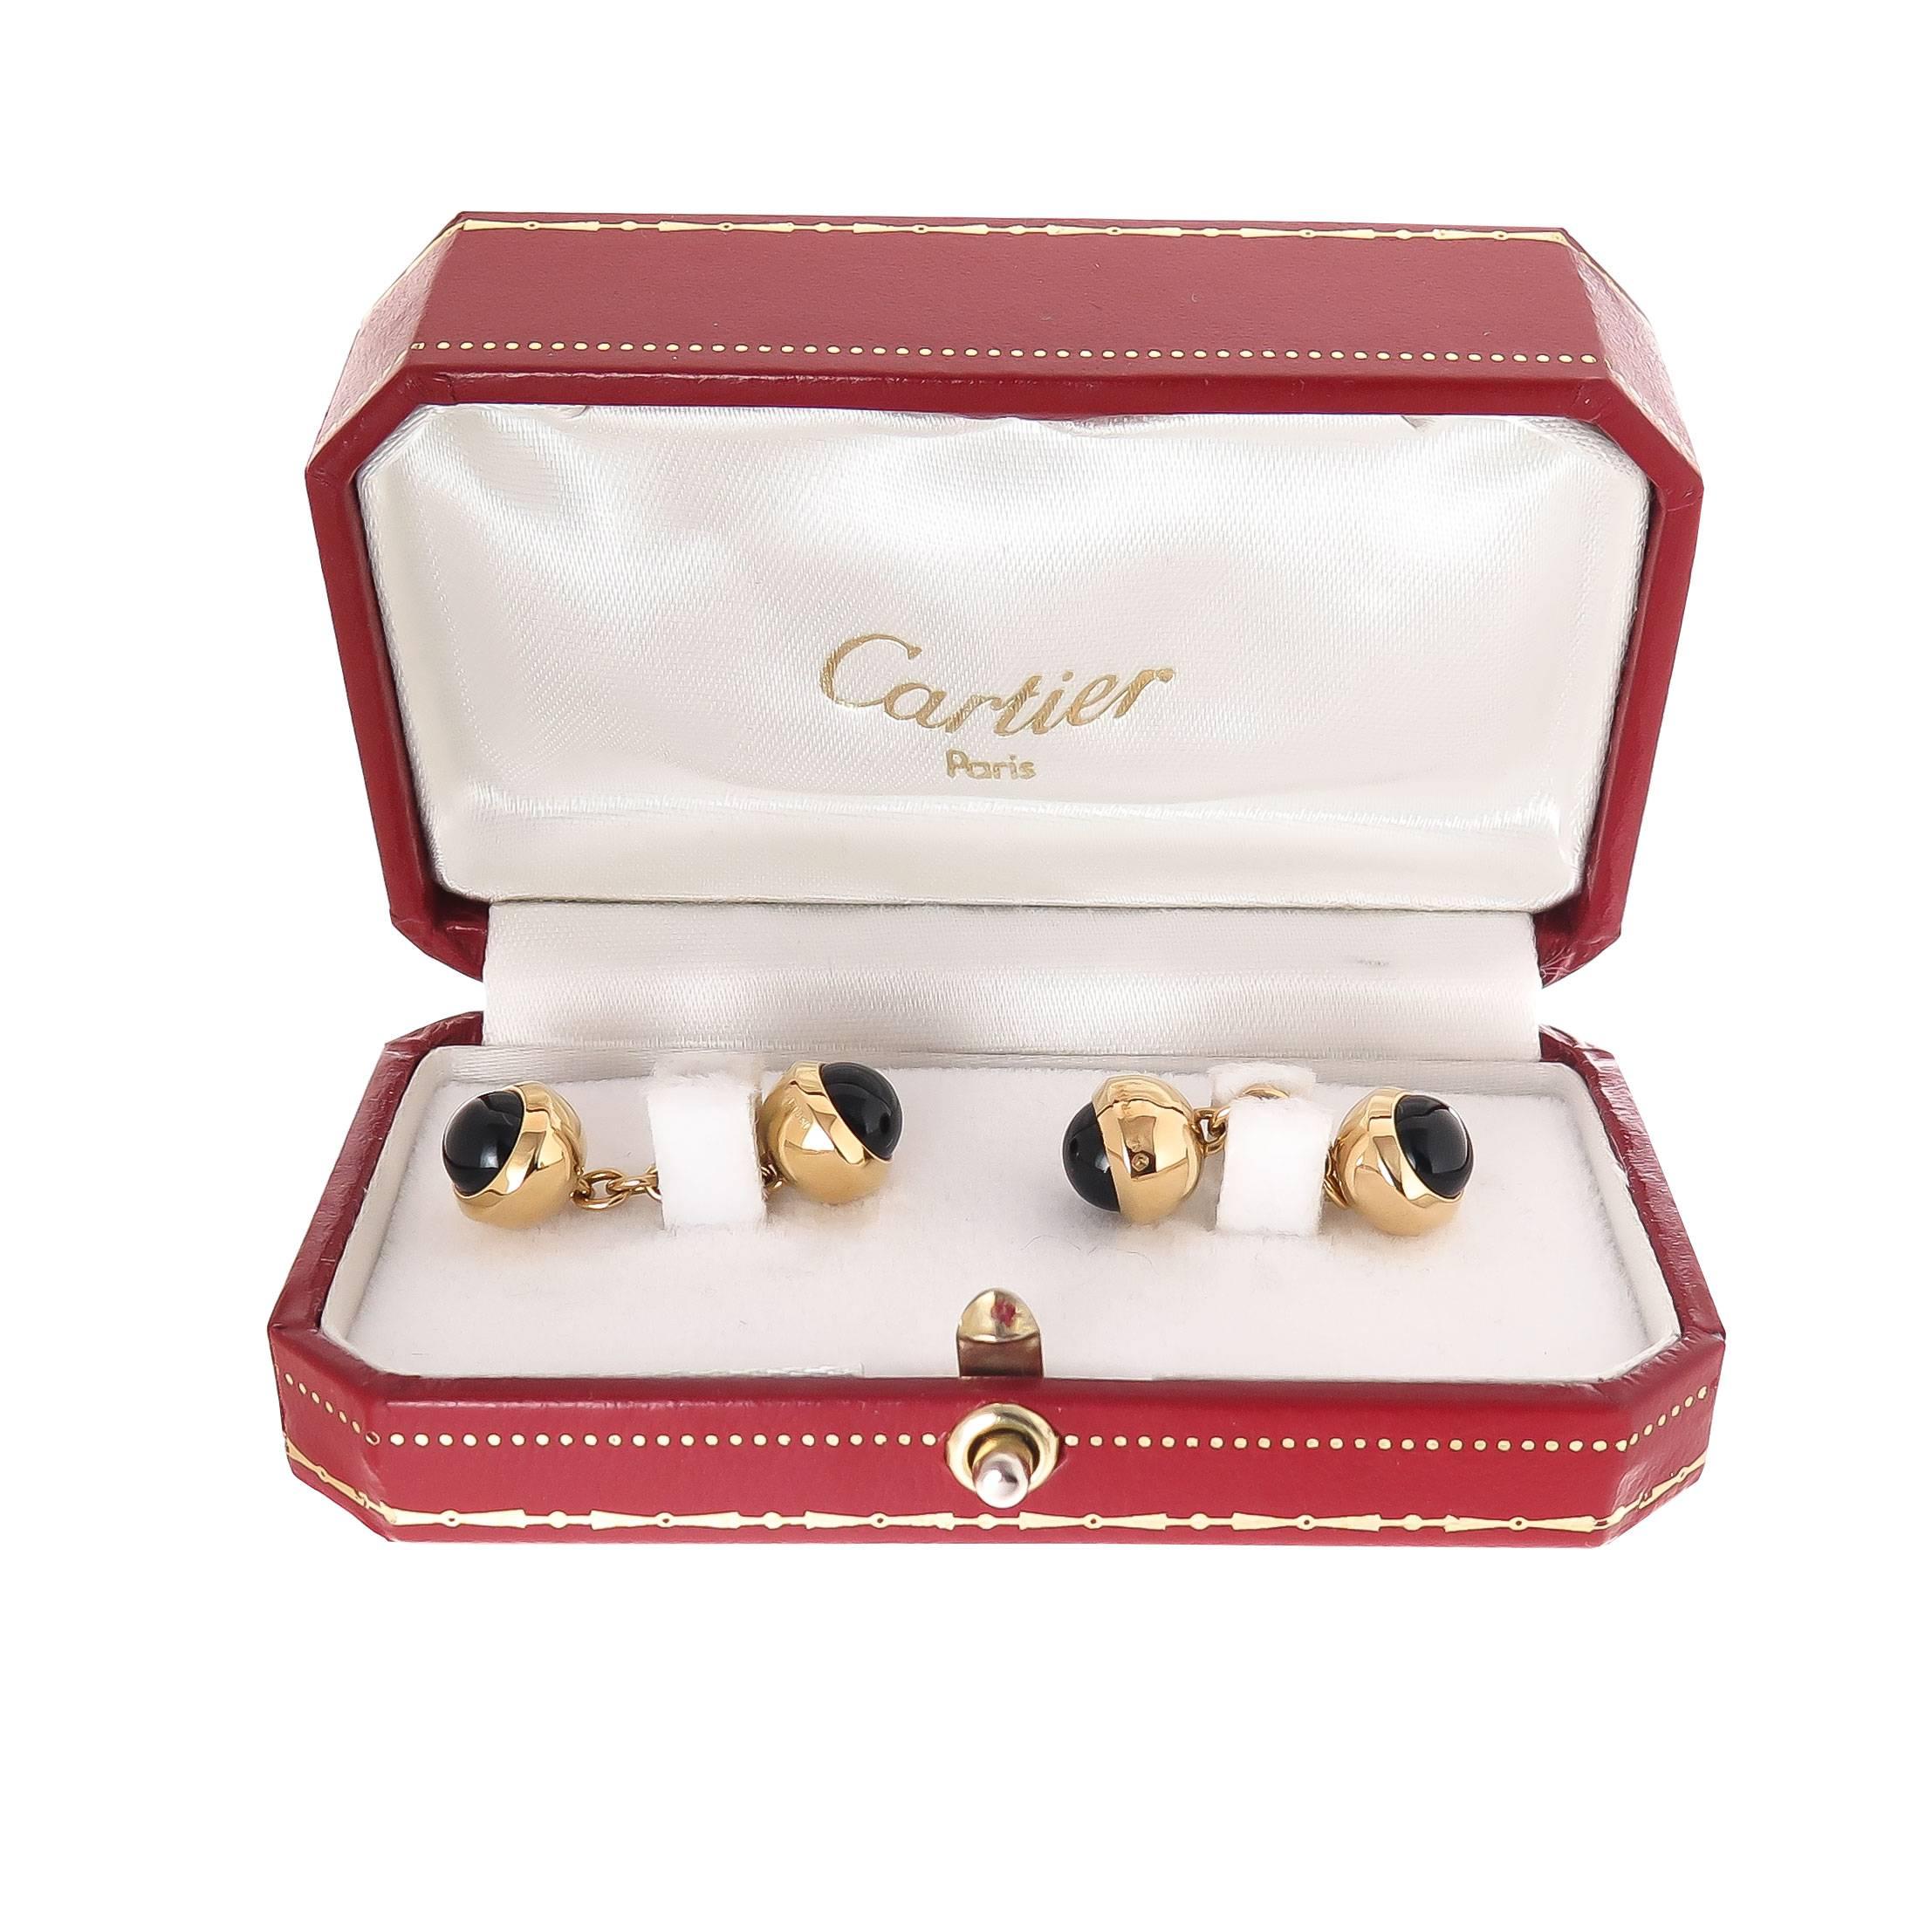 Circa 1990 Cartier 18K Yellow Gold and Onyx double sided Cuff-links, measuring 3/8 inch in diameter and set on each end with a round domed Cabochon Onyx. Signed, numbered and in the original Cartier presentation box.